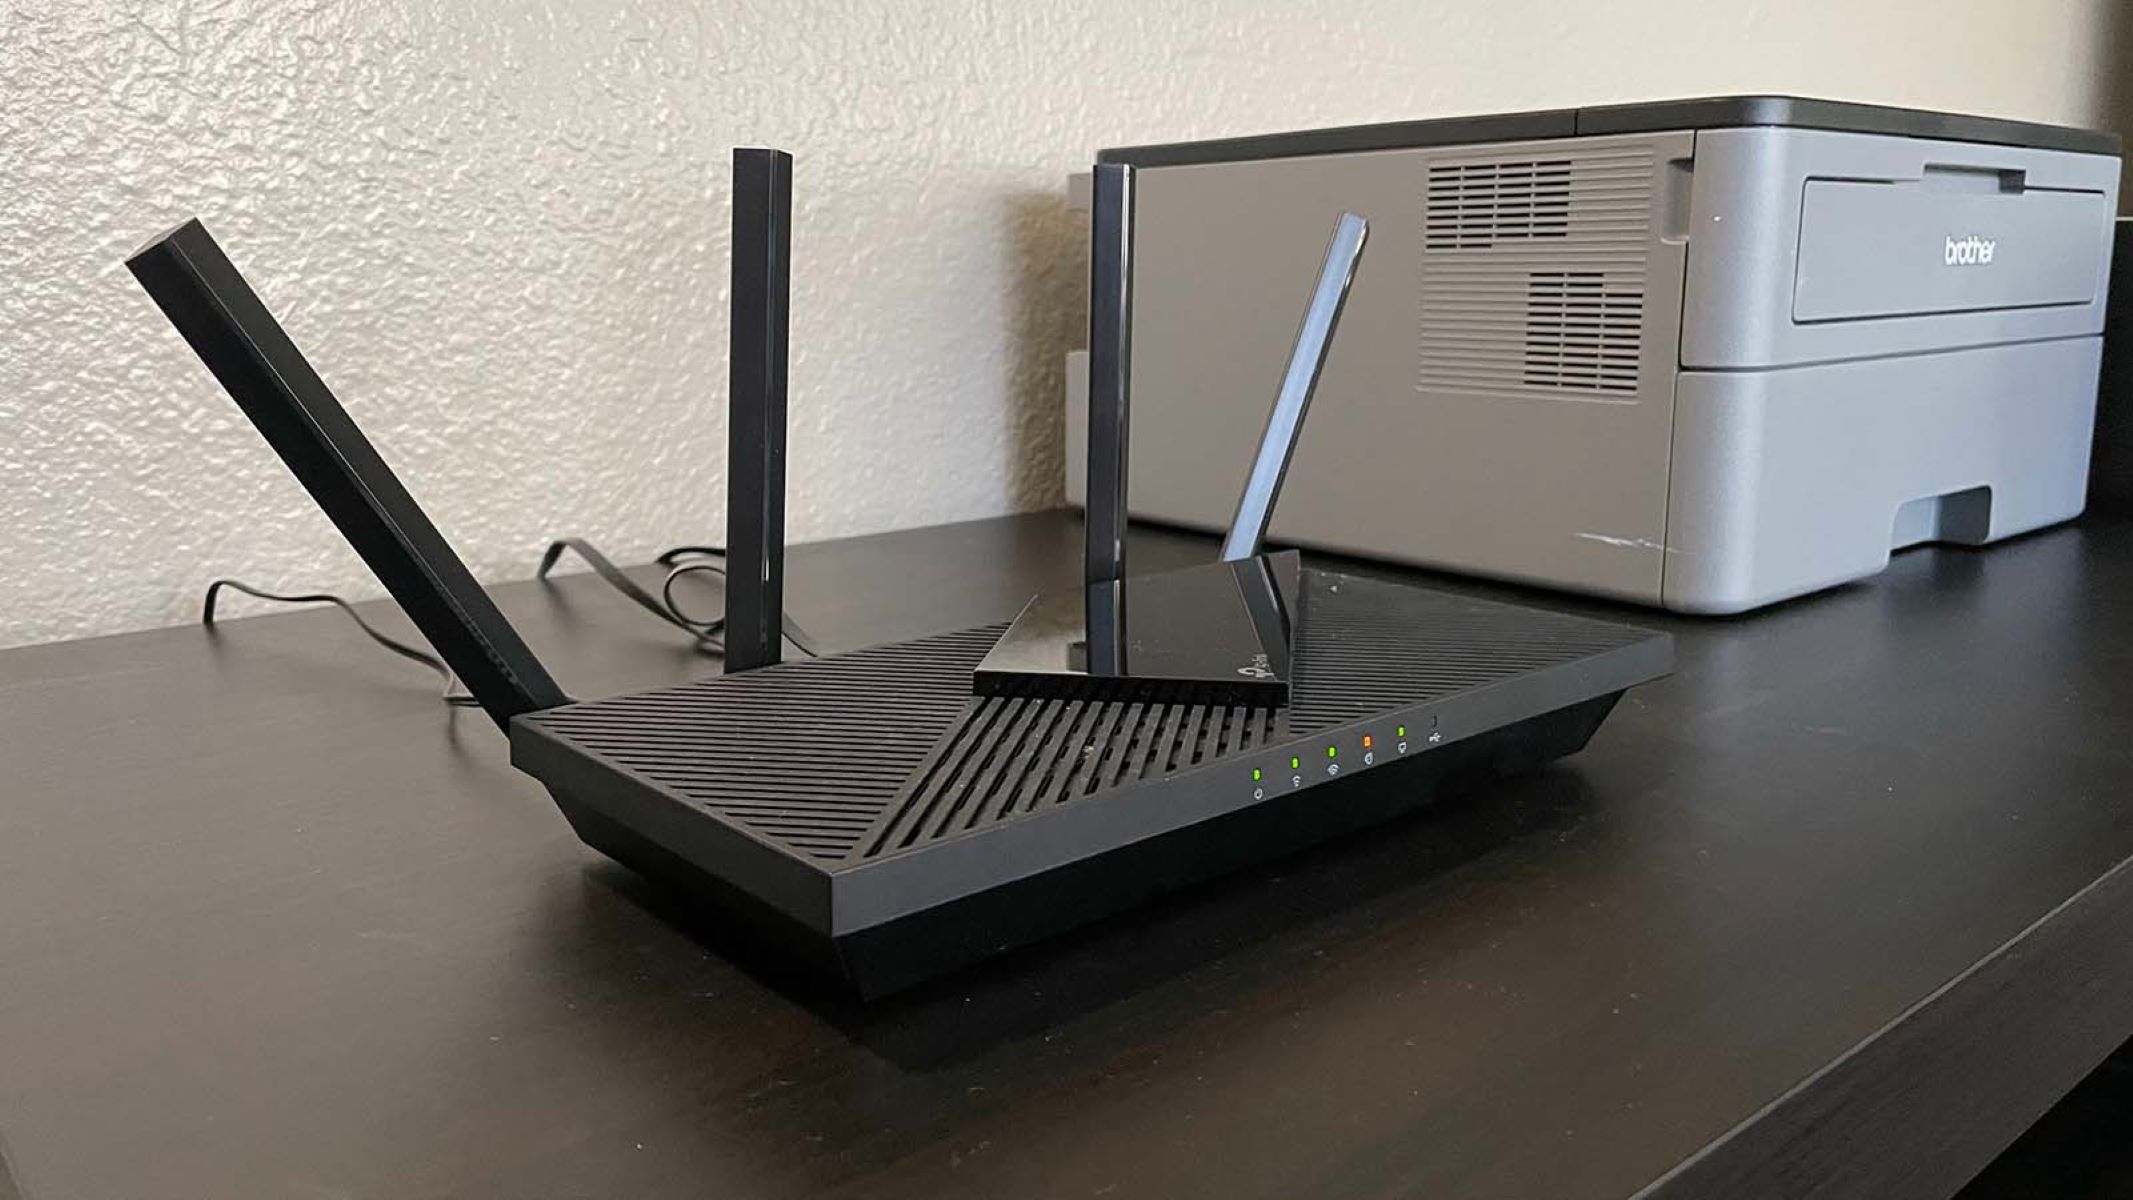 How To Connect Two Routers Wirelessly